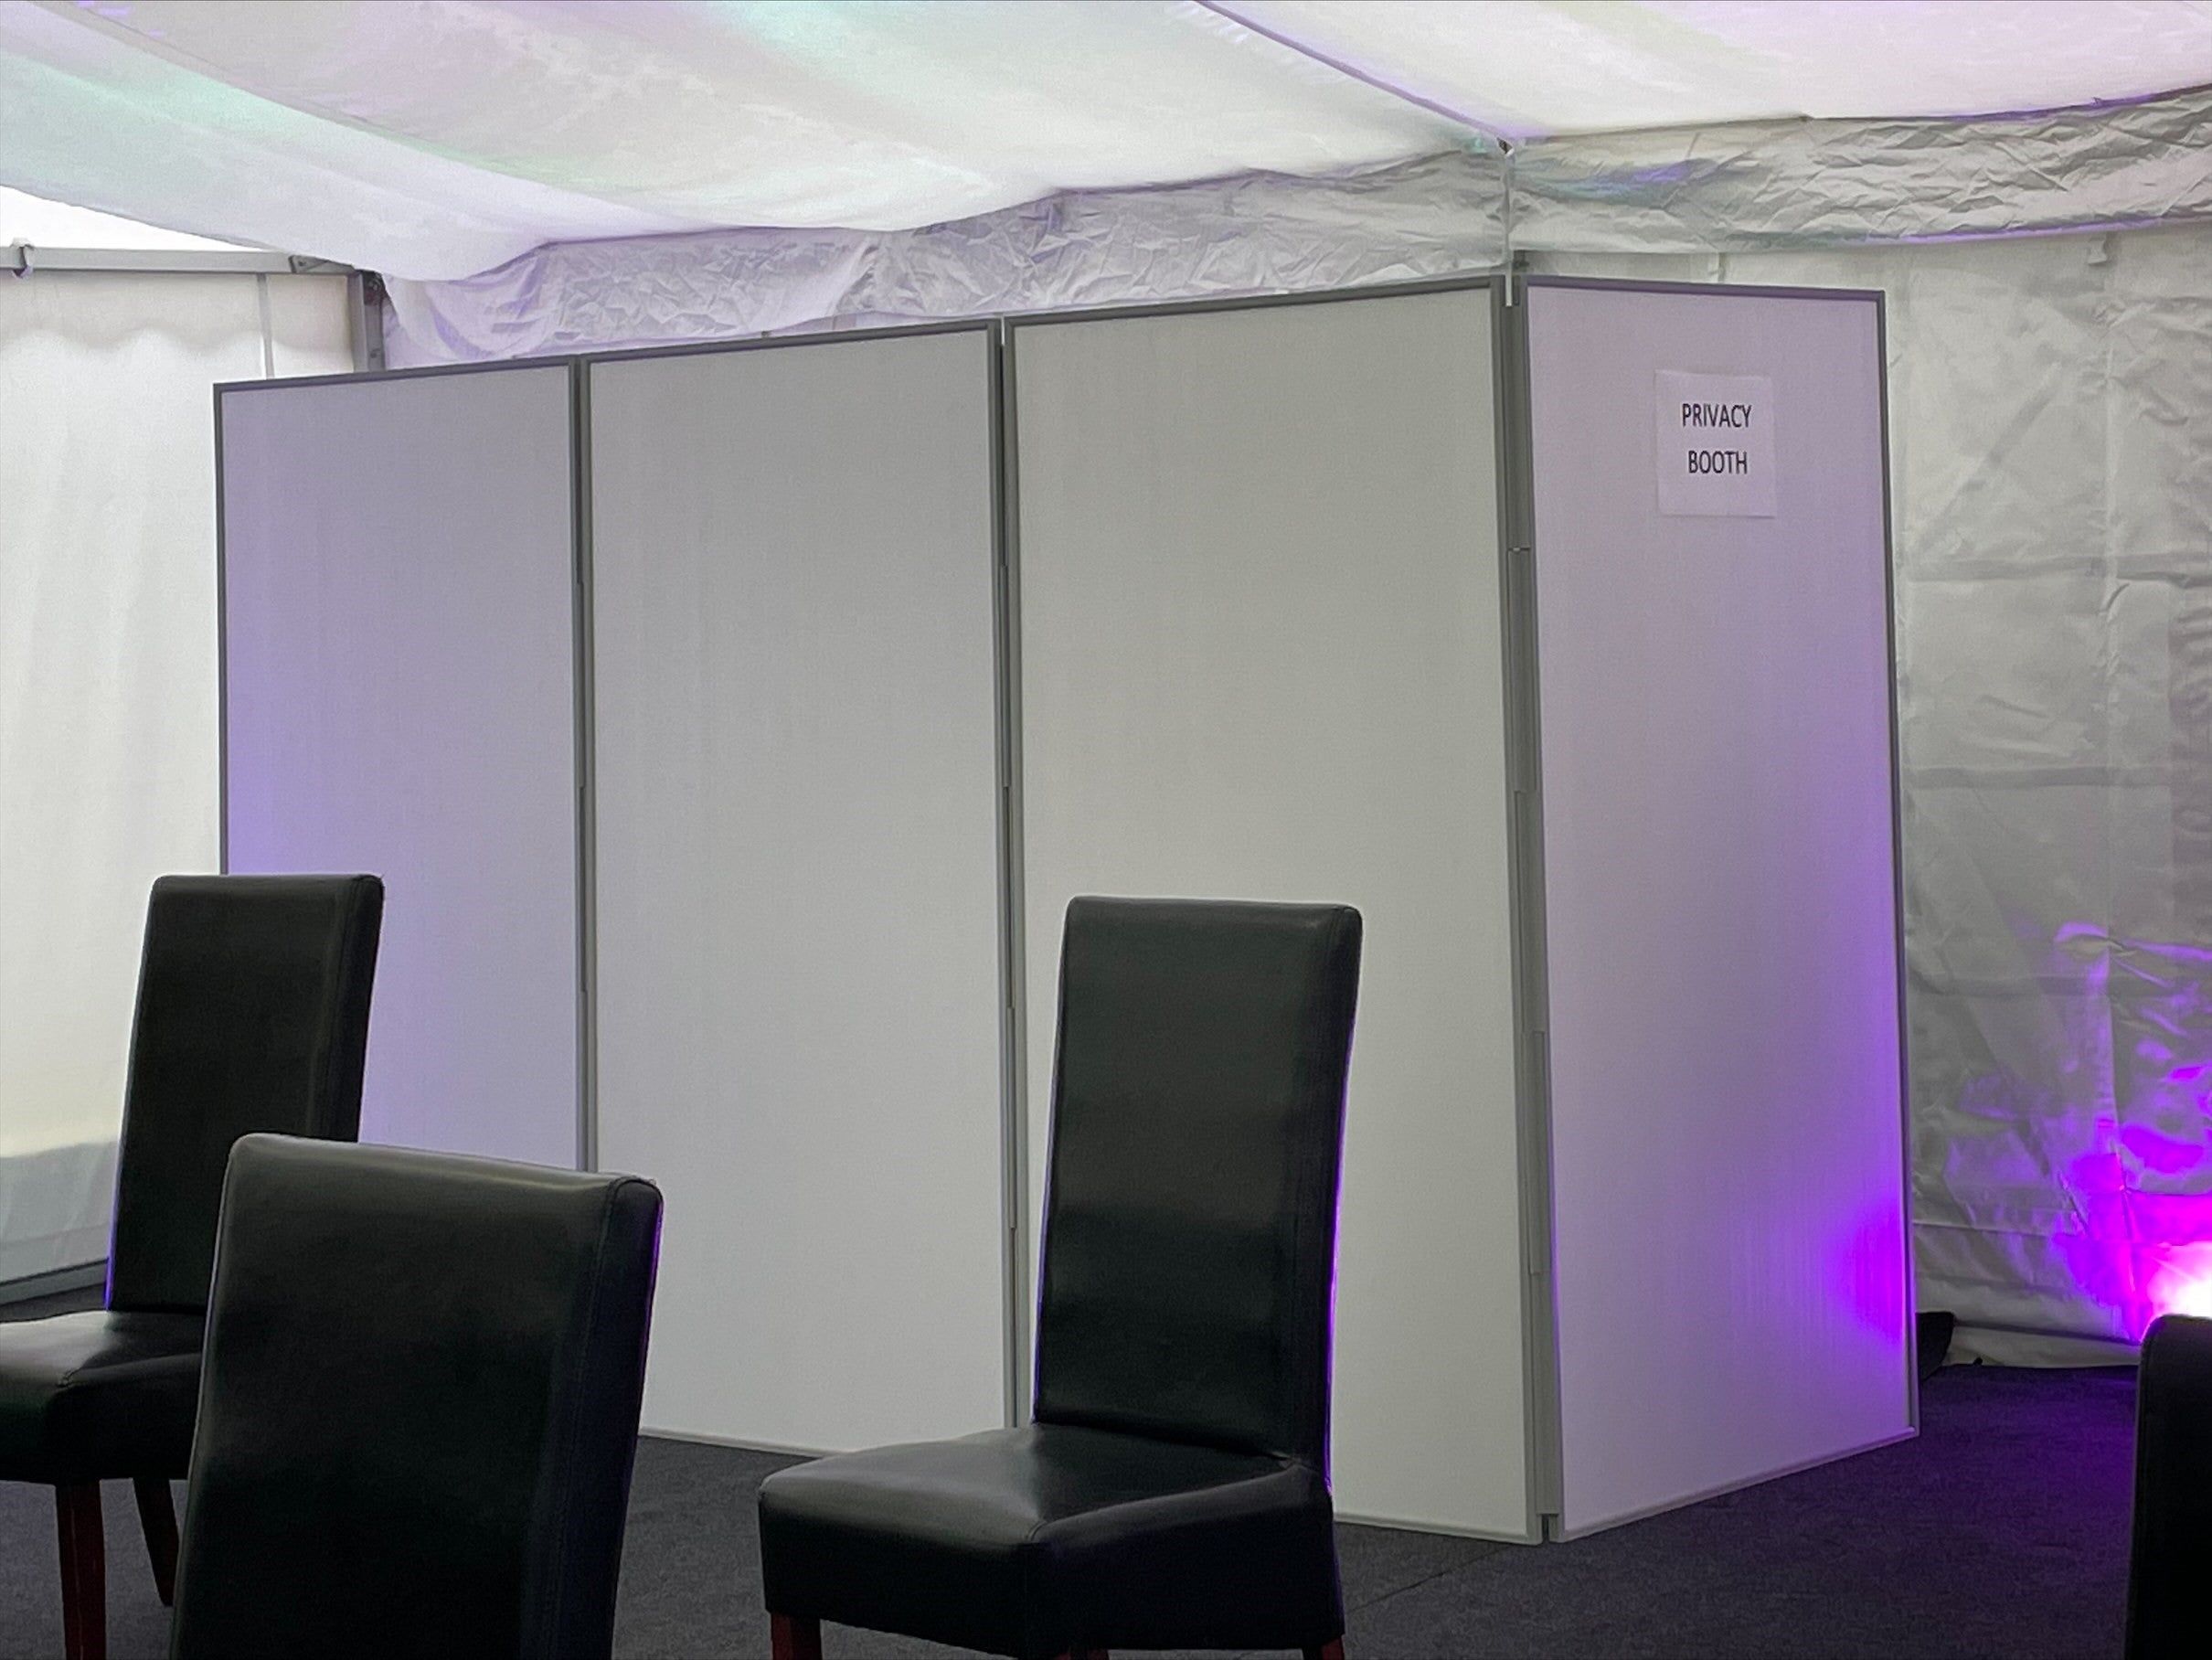 Privacy booth (Laura Parnaby/PA).